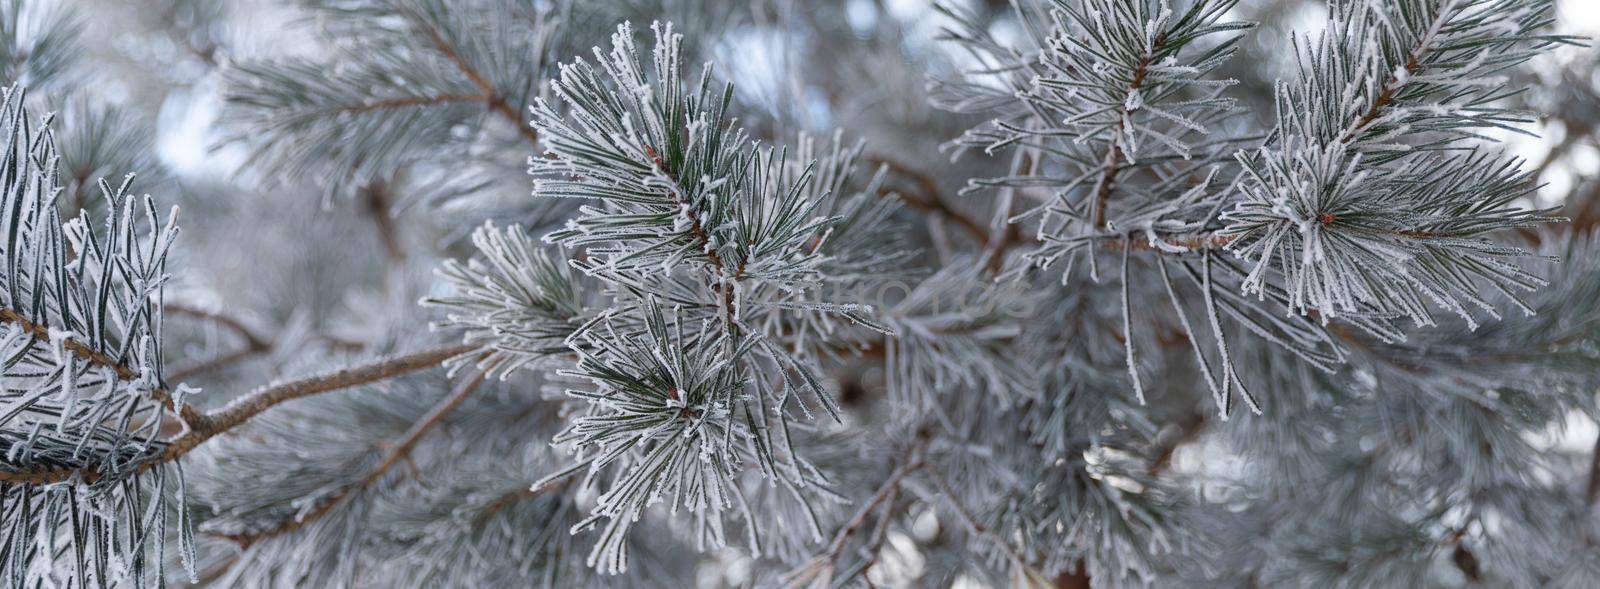 snow-covered spruce branches covered with hoarfrost close-up, needles in frost, photo with depth of field.